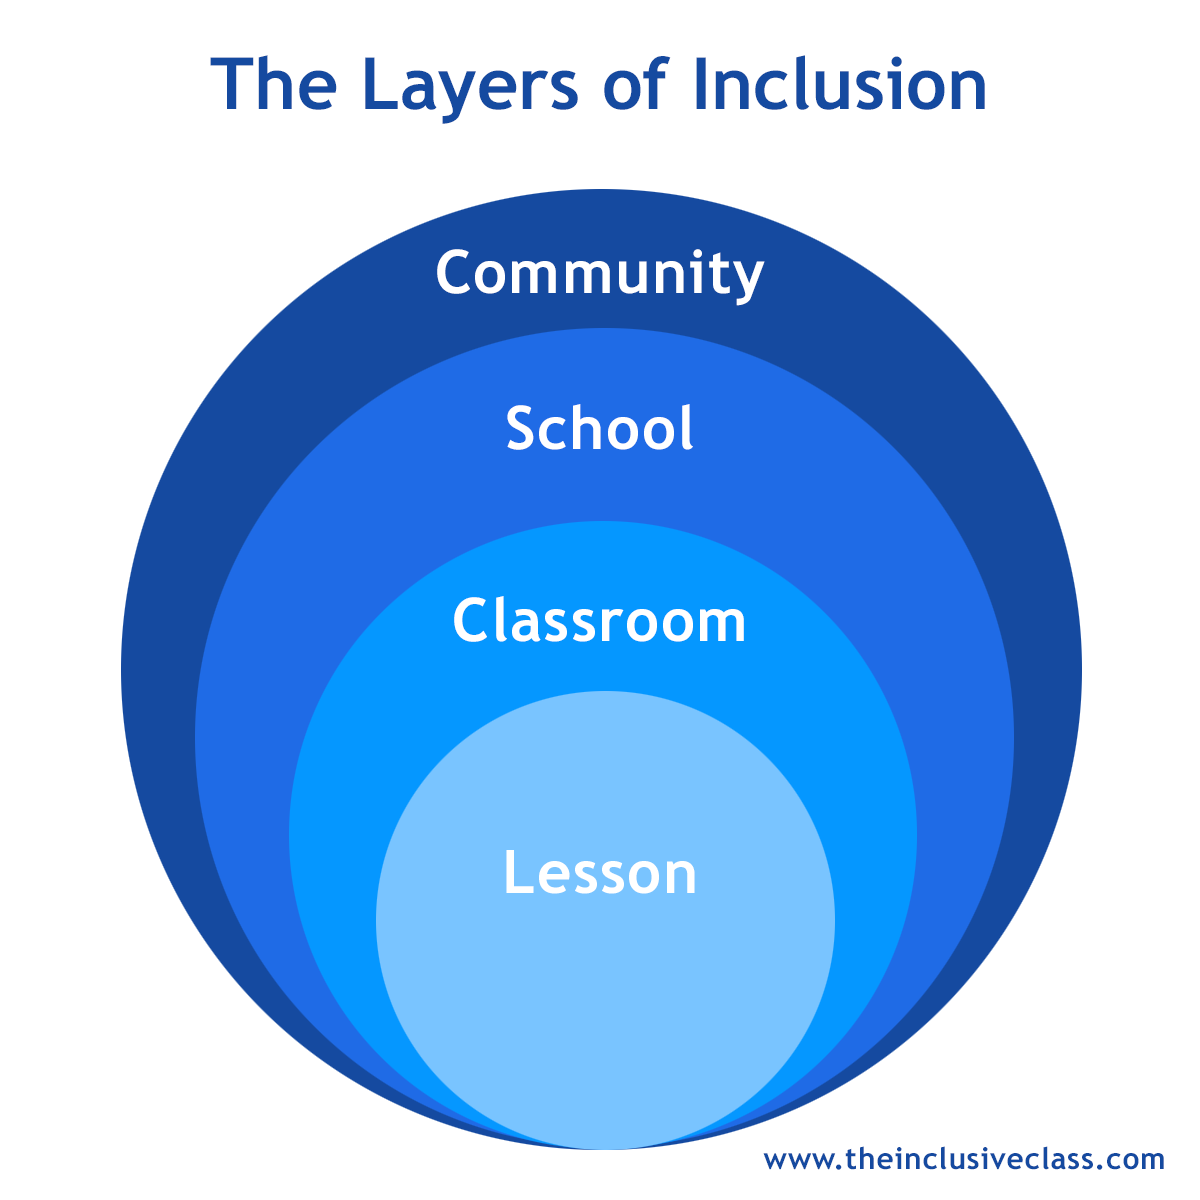 Equitable and Inclusive Education: Learning for All